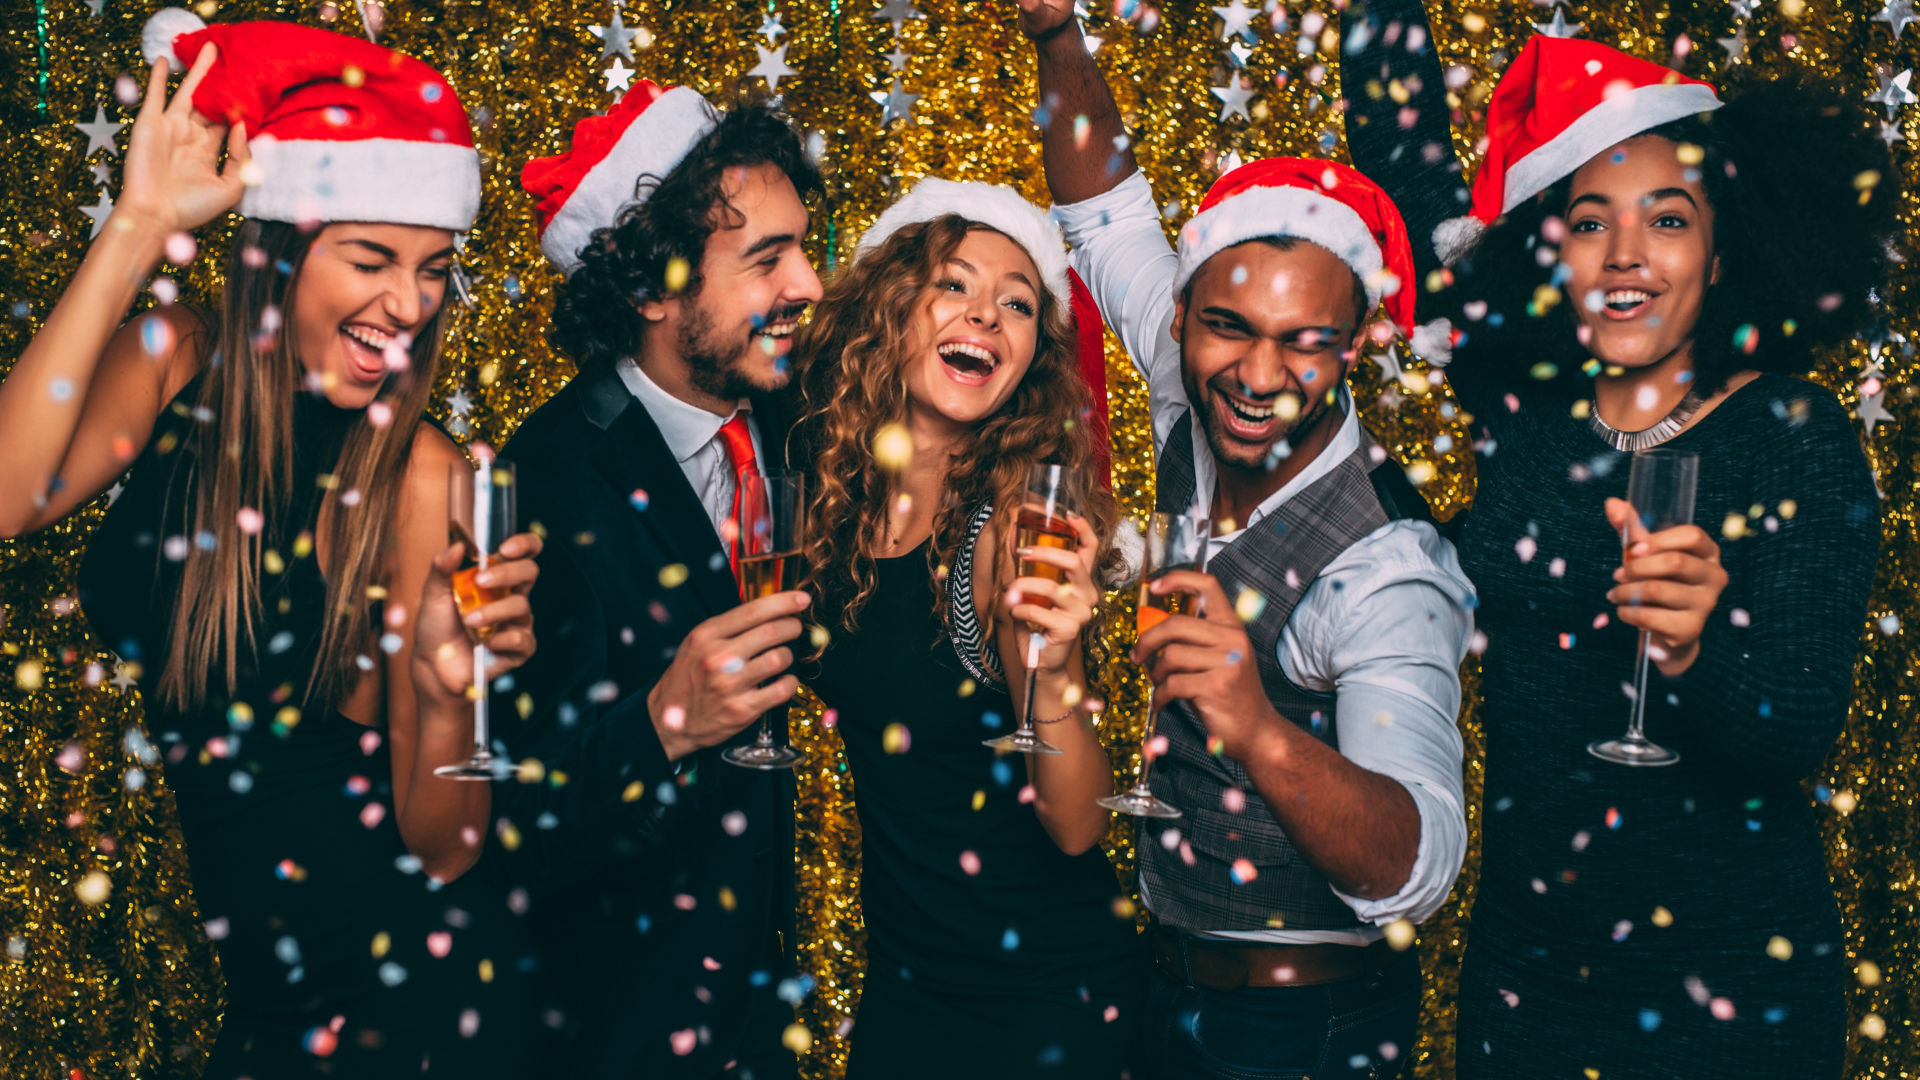 Fun Christmas Party Games for Everyone to Enjoy